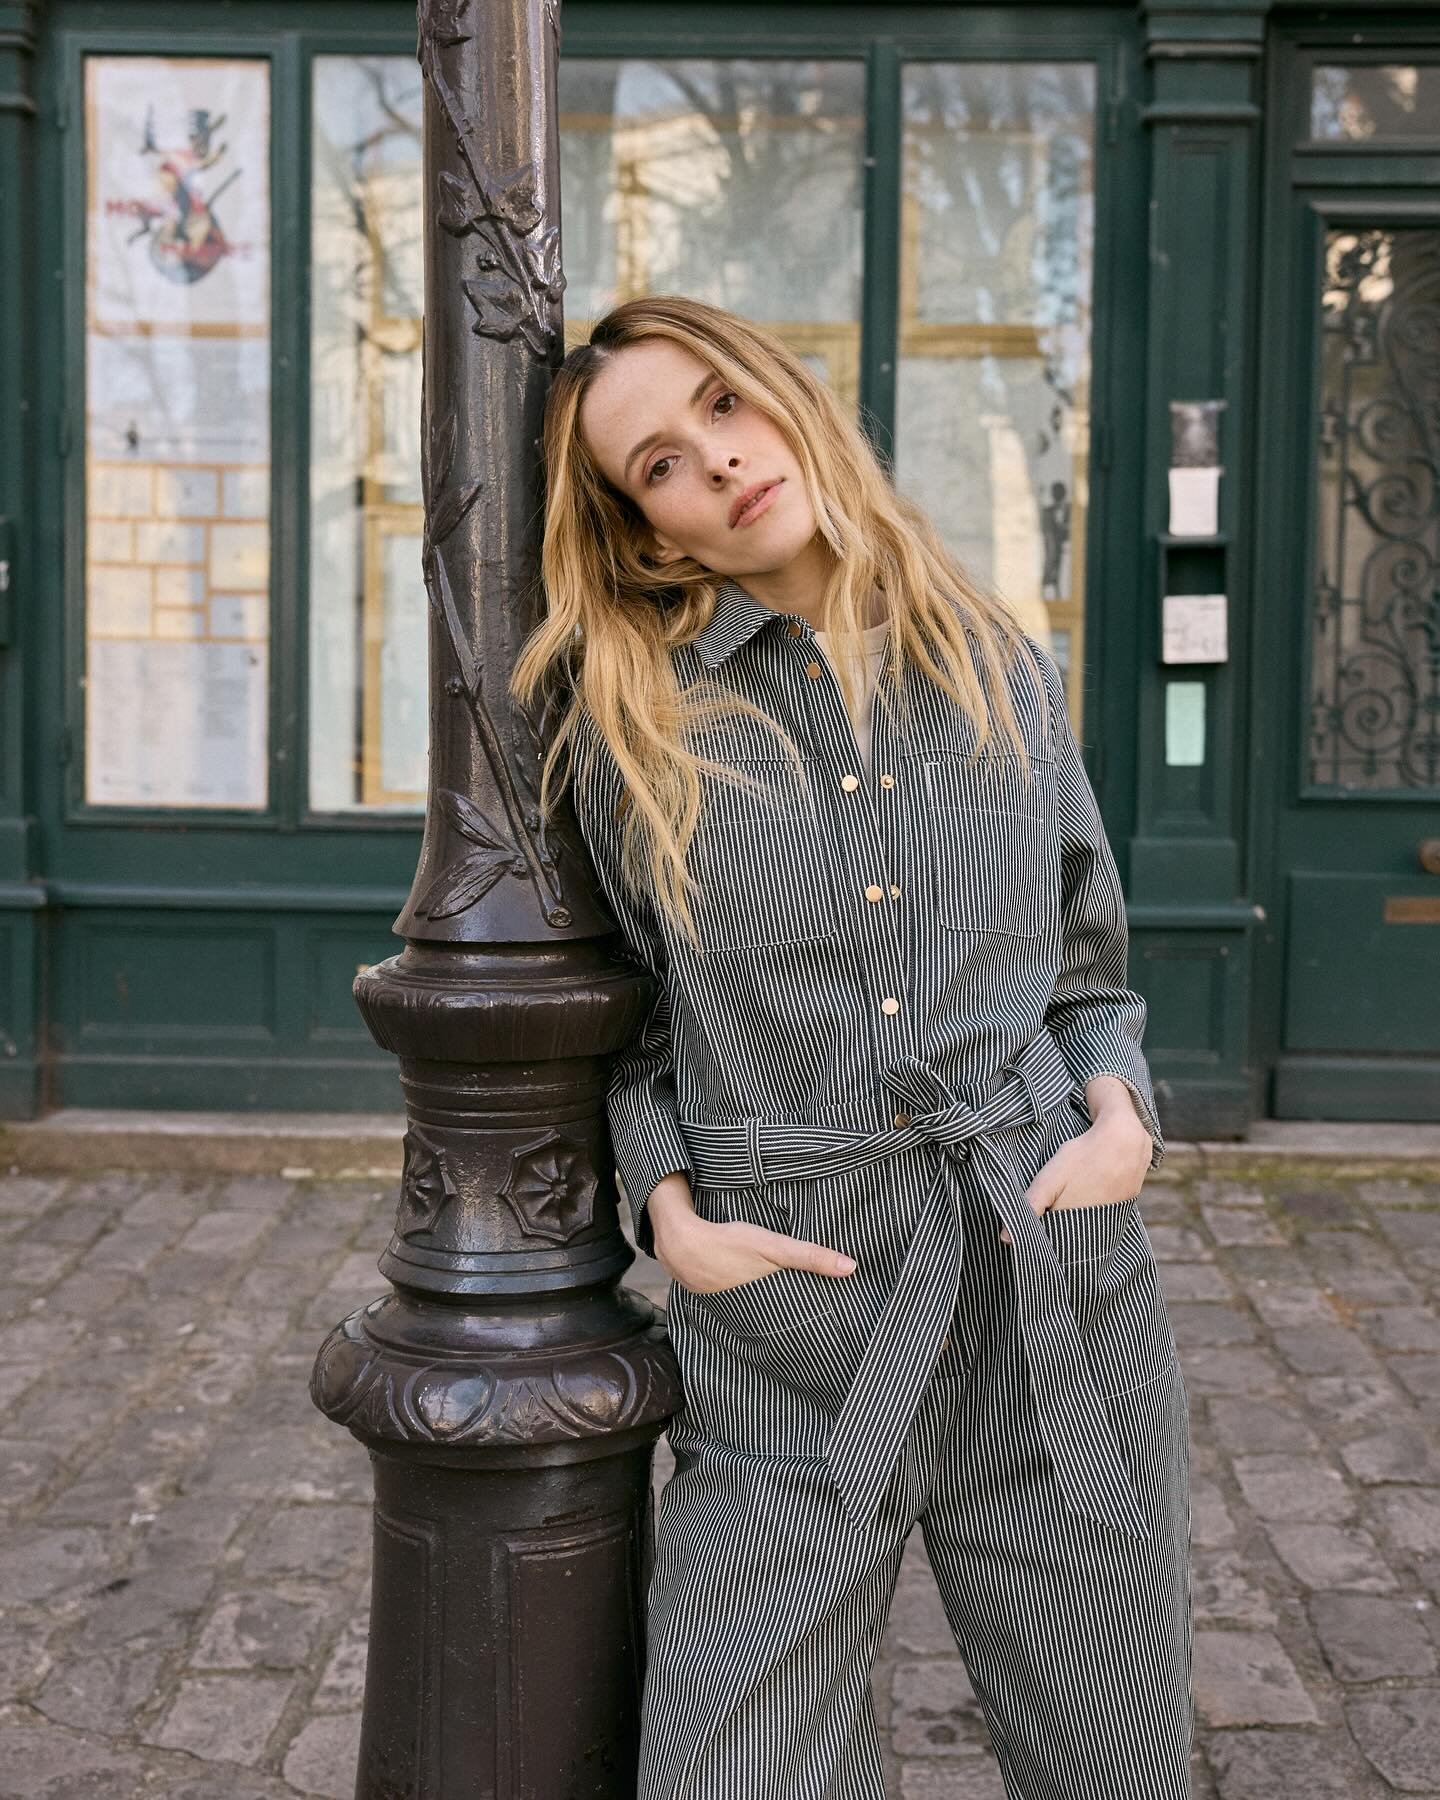 LE ANDR&Eacute;
Organic Denim

Minimalist and cool yet sophisticated, jumpsuits are our go-to piece when it comes to choose an outfit we'd be comfortable in, yet look put-together. Modeled on traditional boiler styles, Le Andr&eacute; jumpsuit's desi